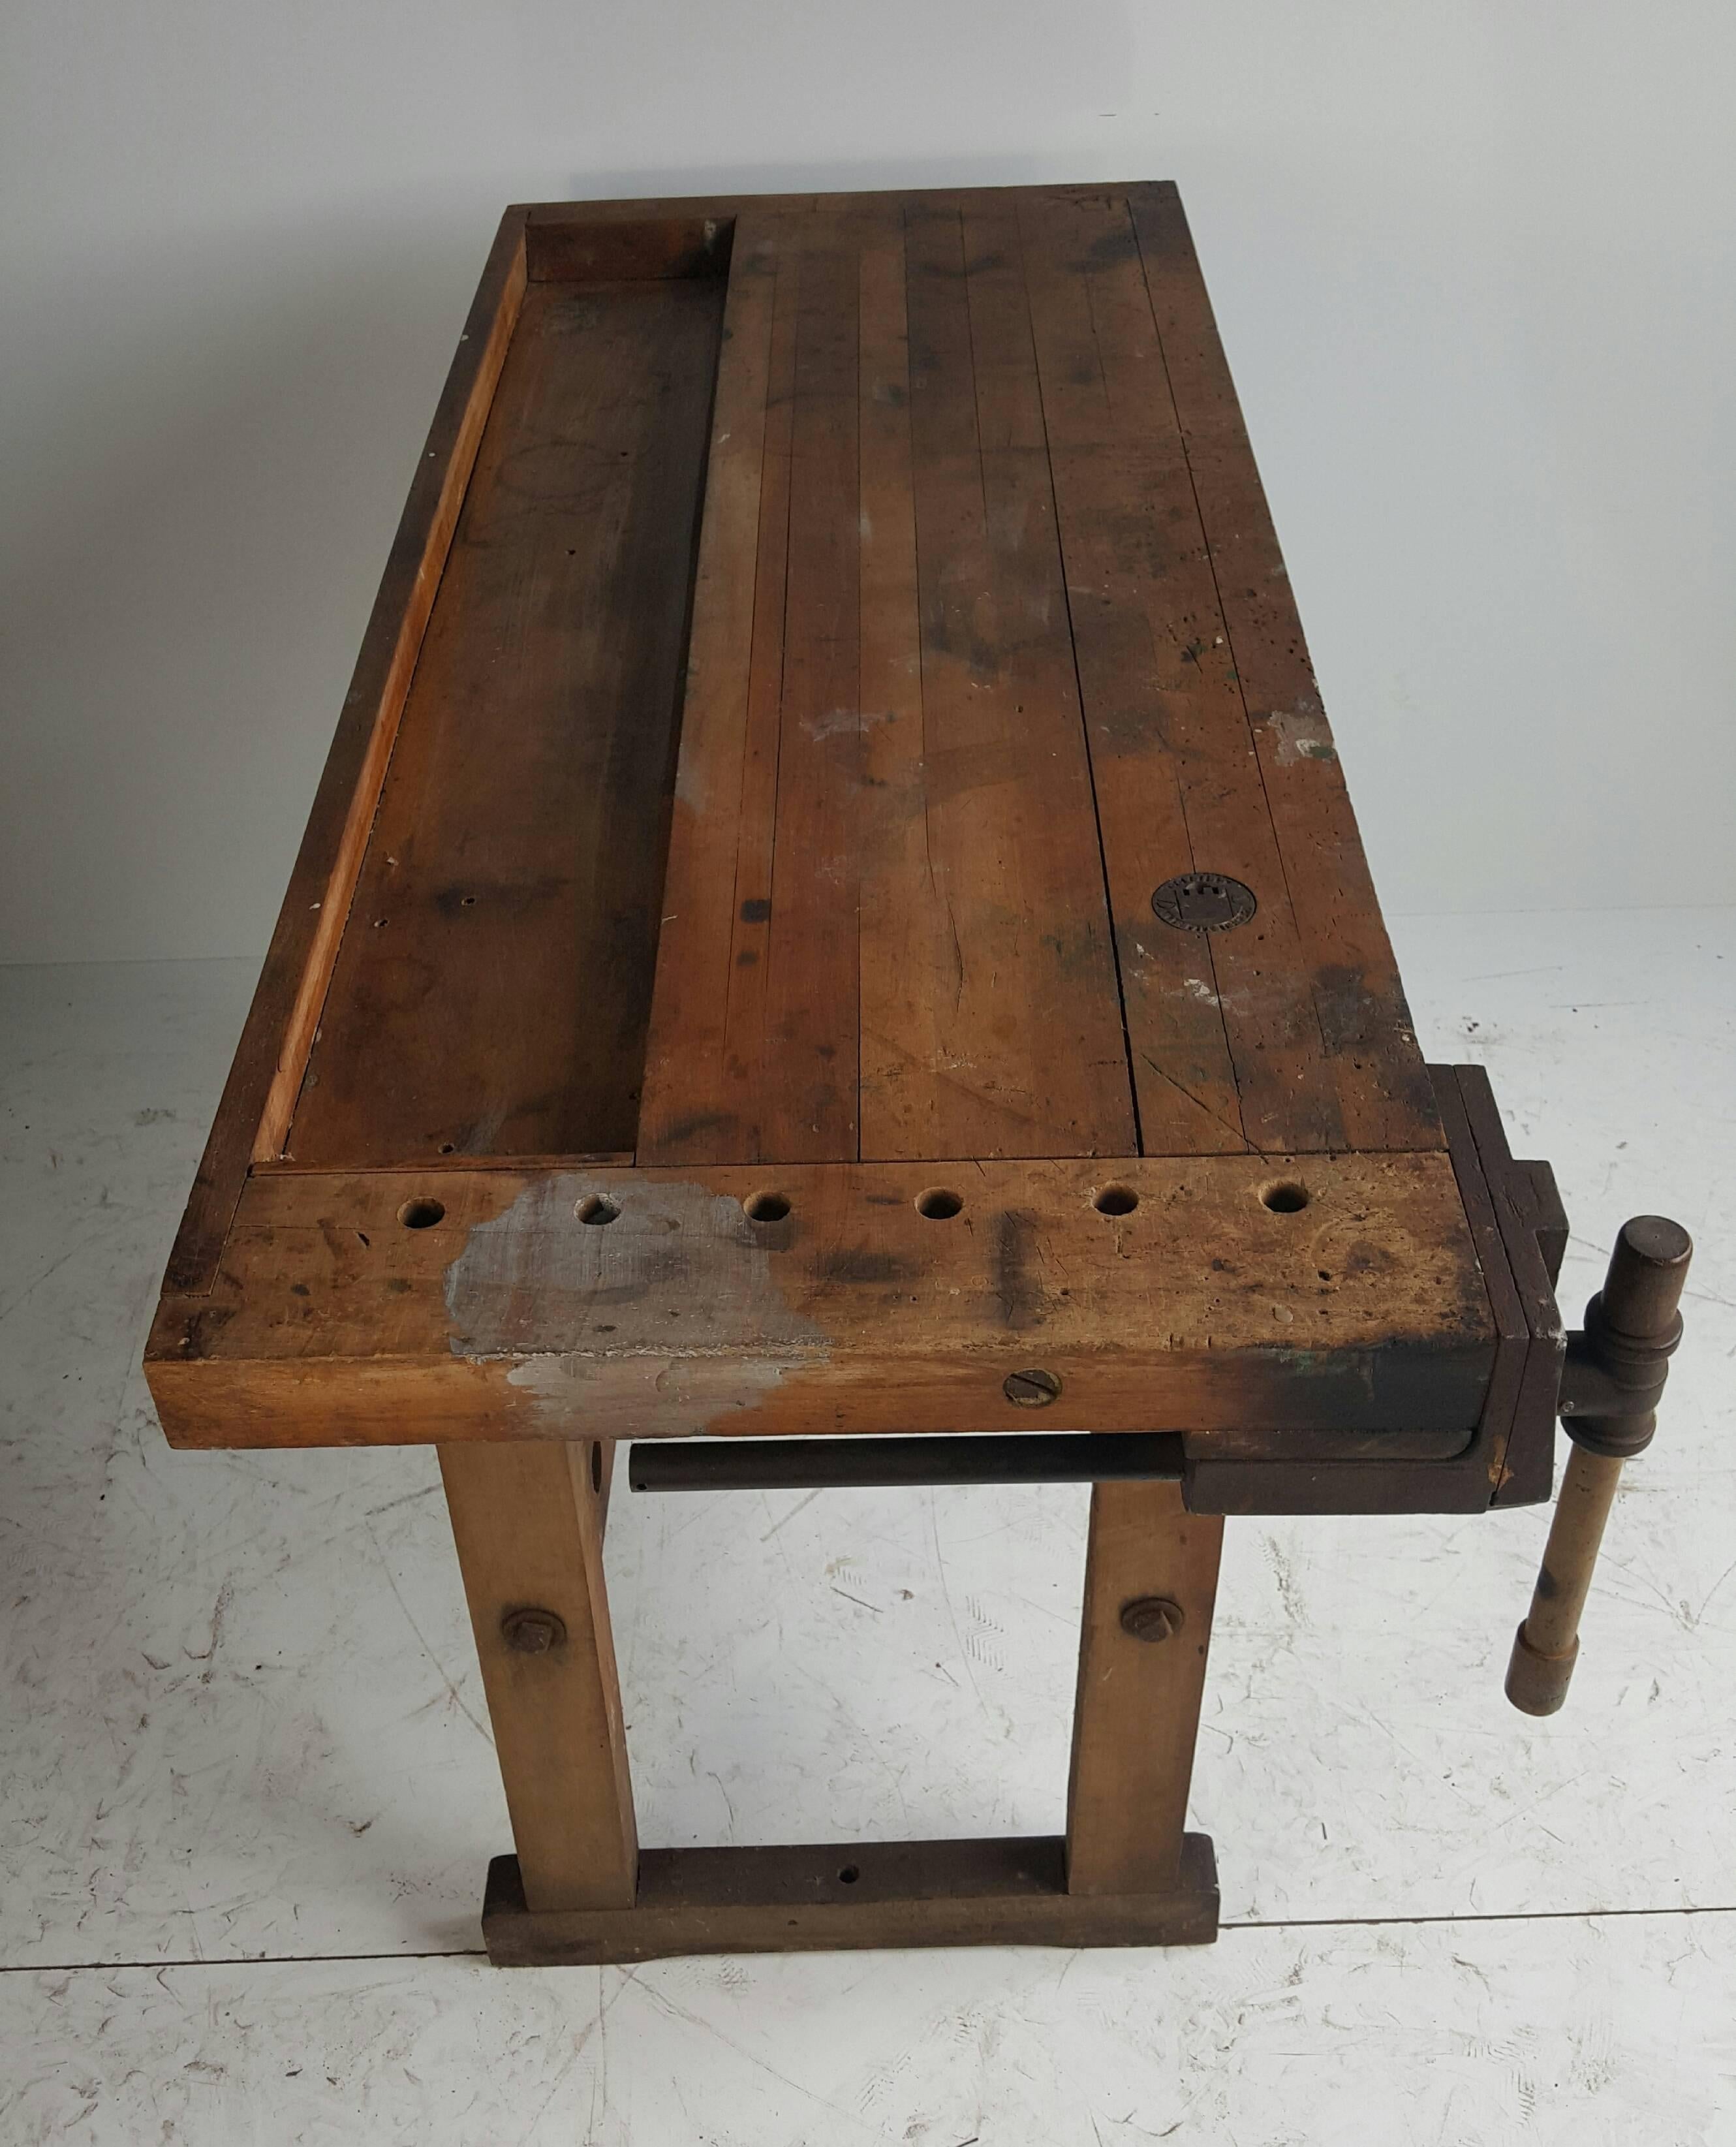 Small Industrial Work Bench, C. Christiansen, Abernathy Vice In Distressed Condition In Buffalo, NY